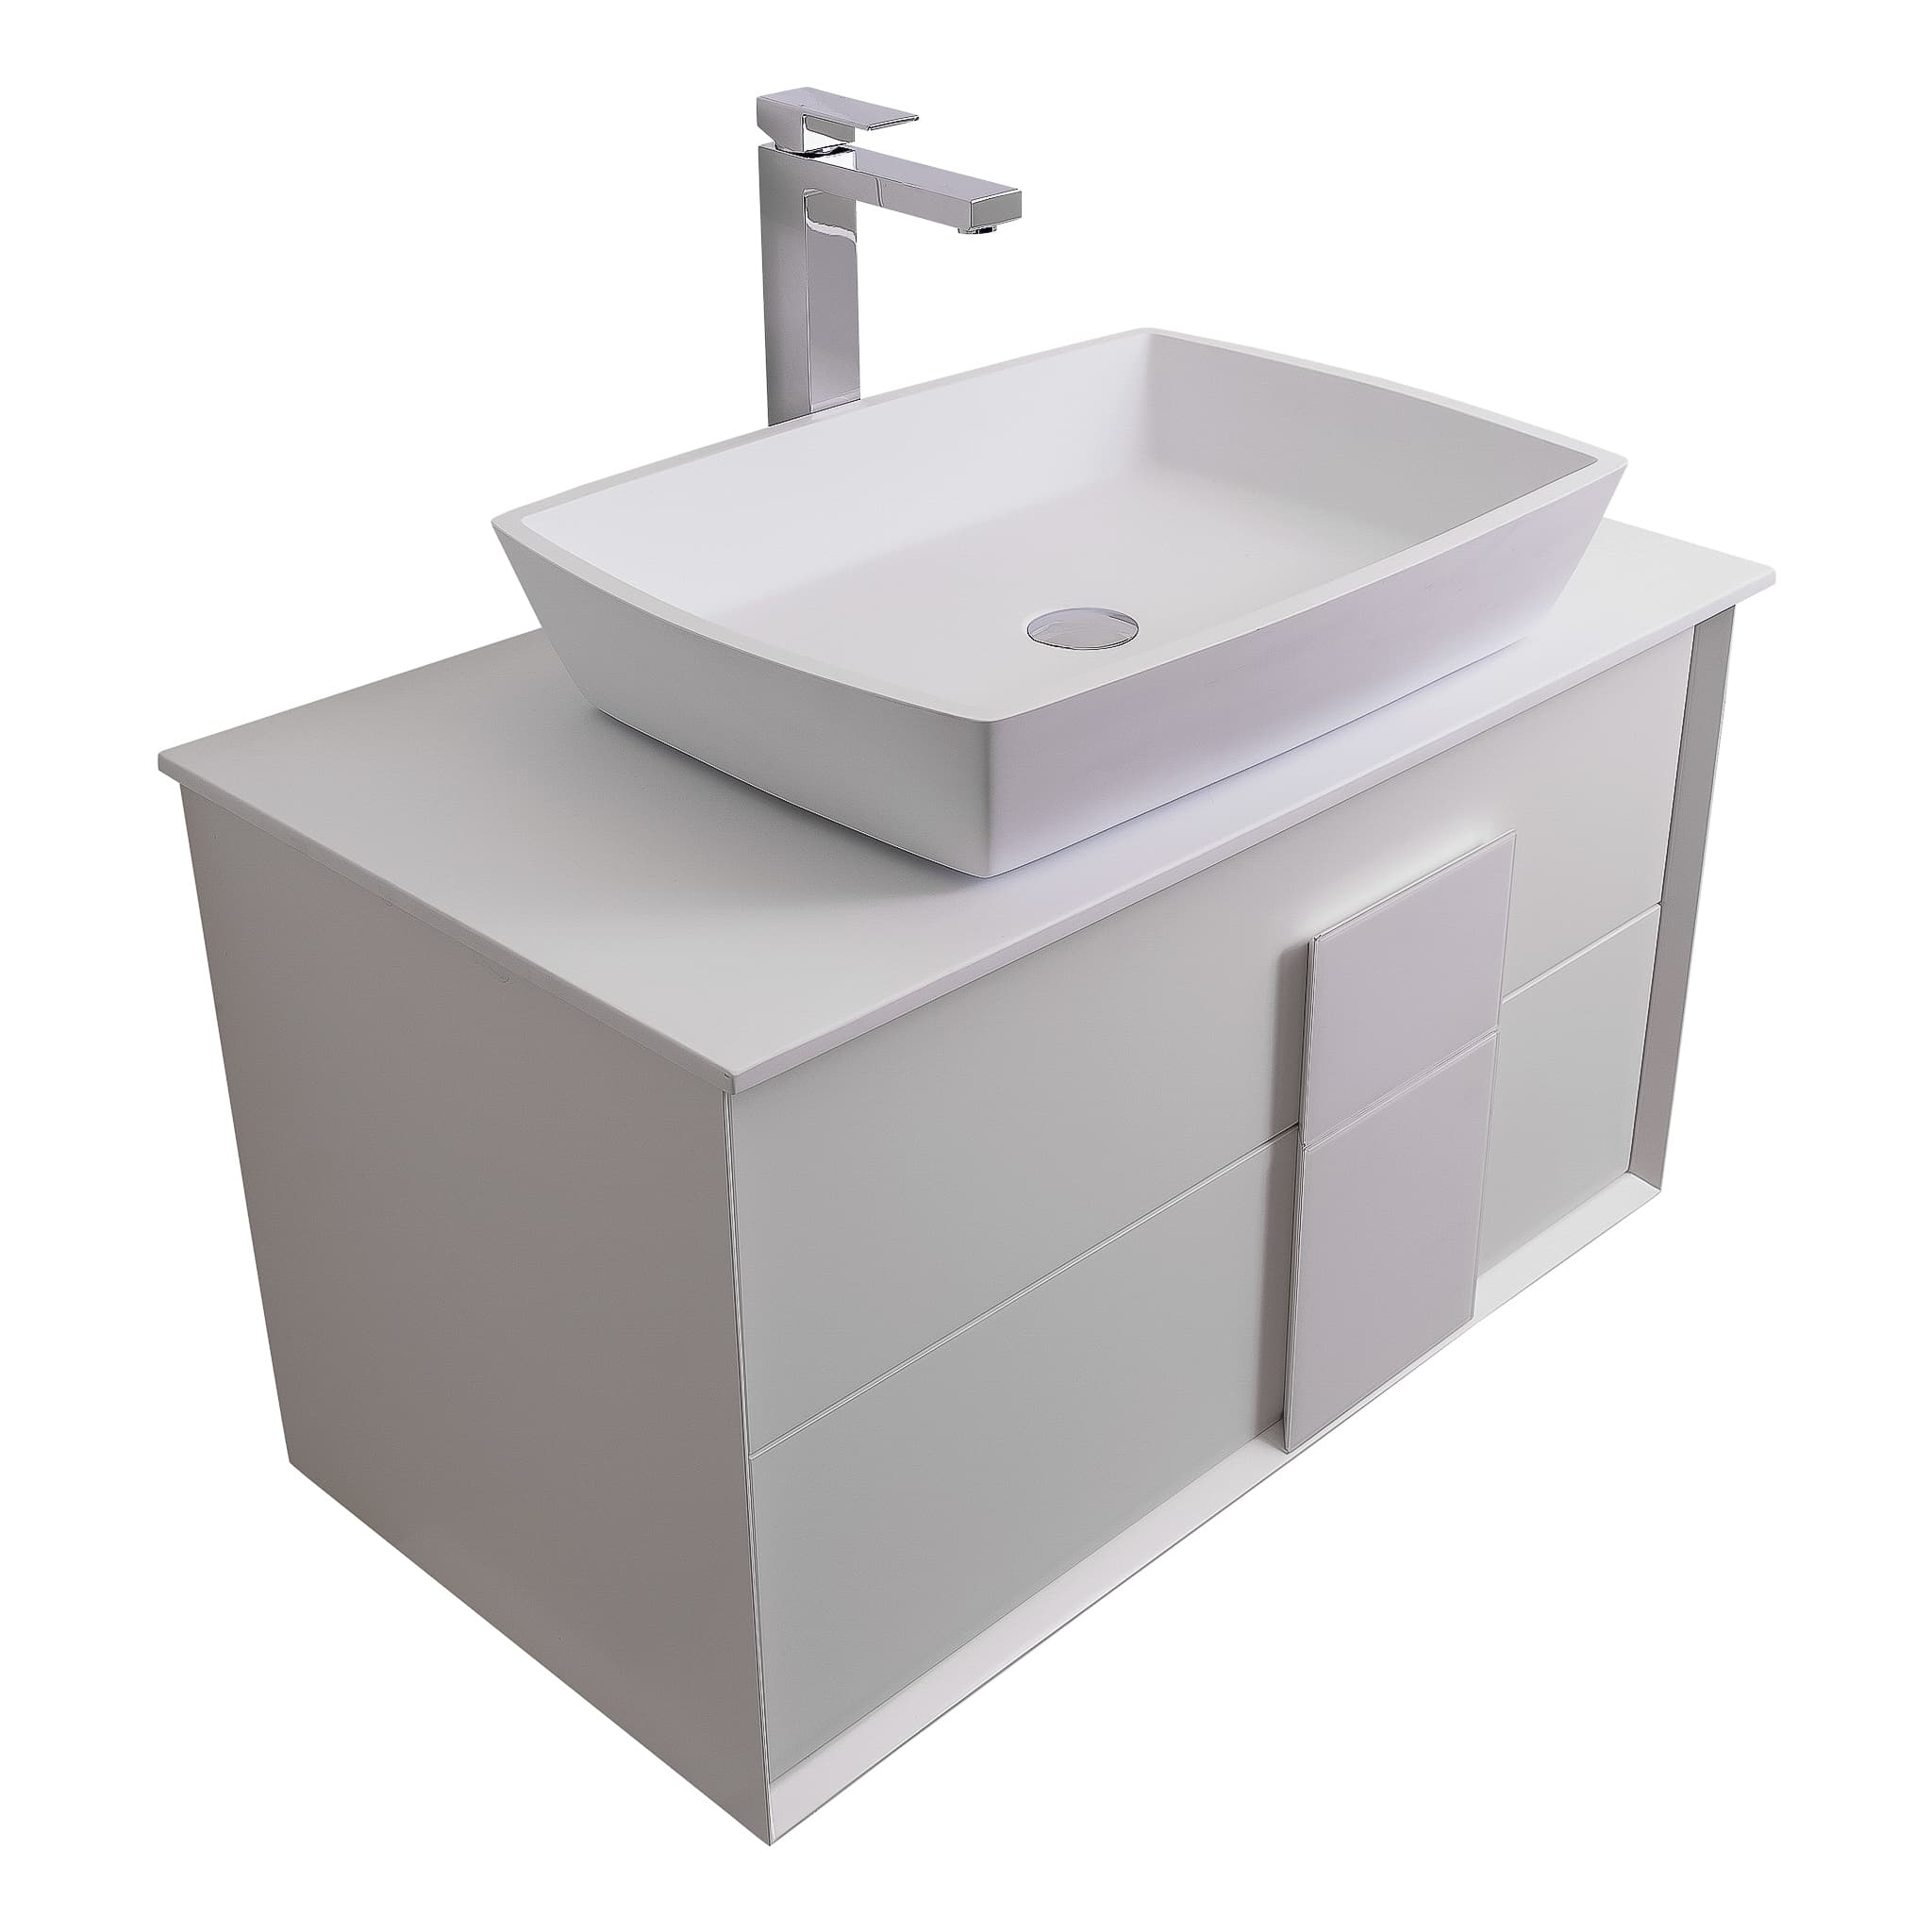 Piazza 31.5 Matte White With White Handle Cabinet, Solid Surface Flat White Counter and Square Solid Surface White Basin 1316, Wall Mounted Modern Vanity Set